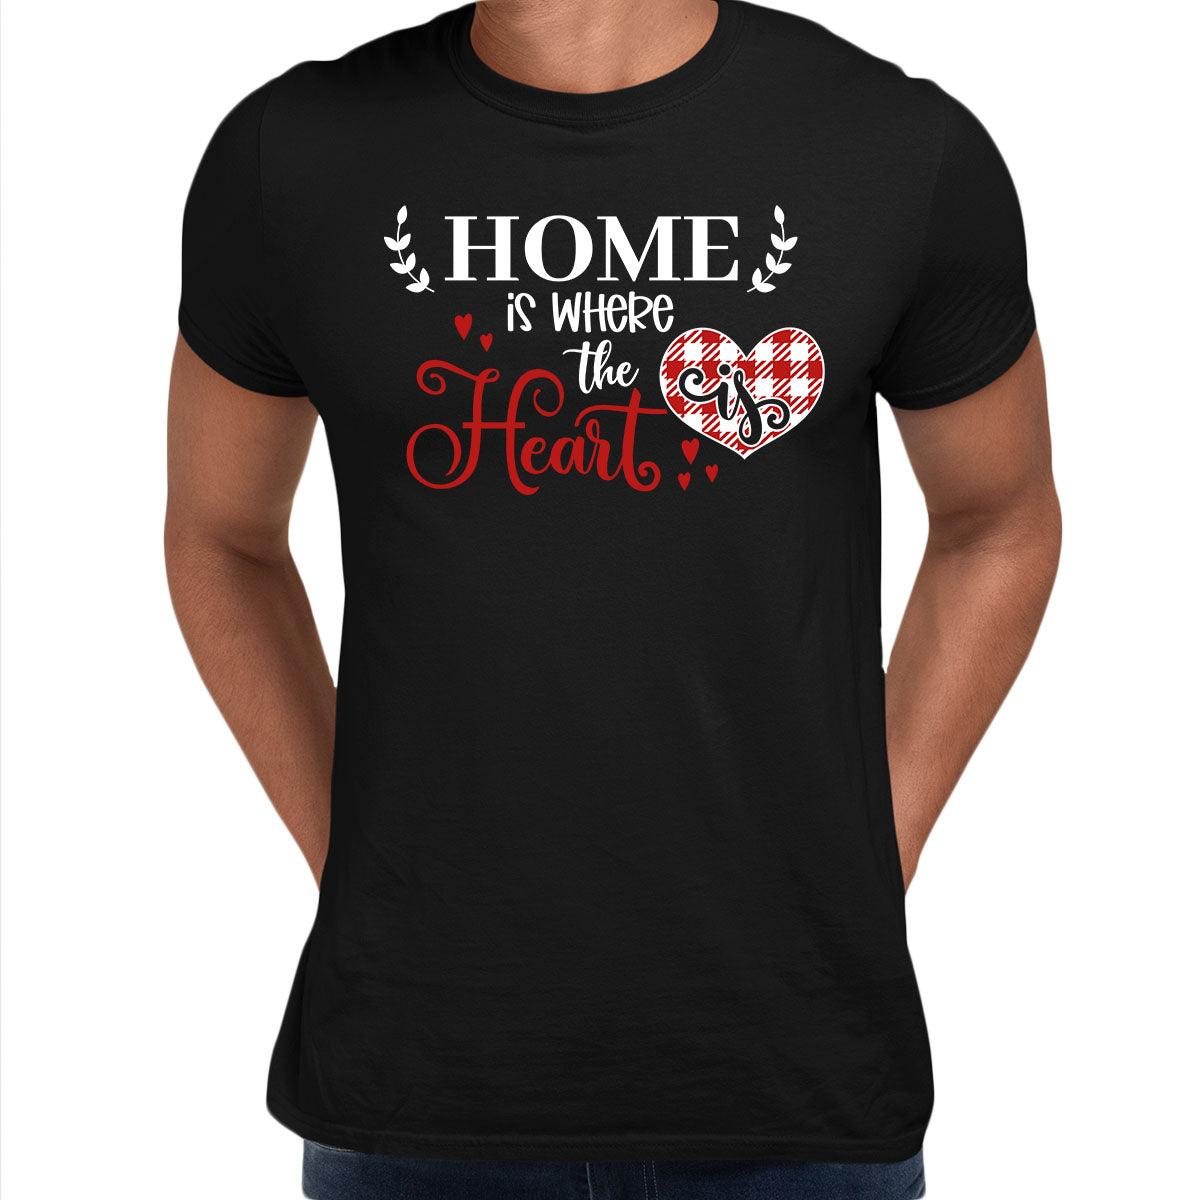 Home is where the heart is Valentines Love T-shirt for men Unisex T-Shirt - Kuzi Tees